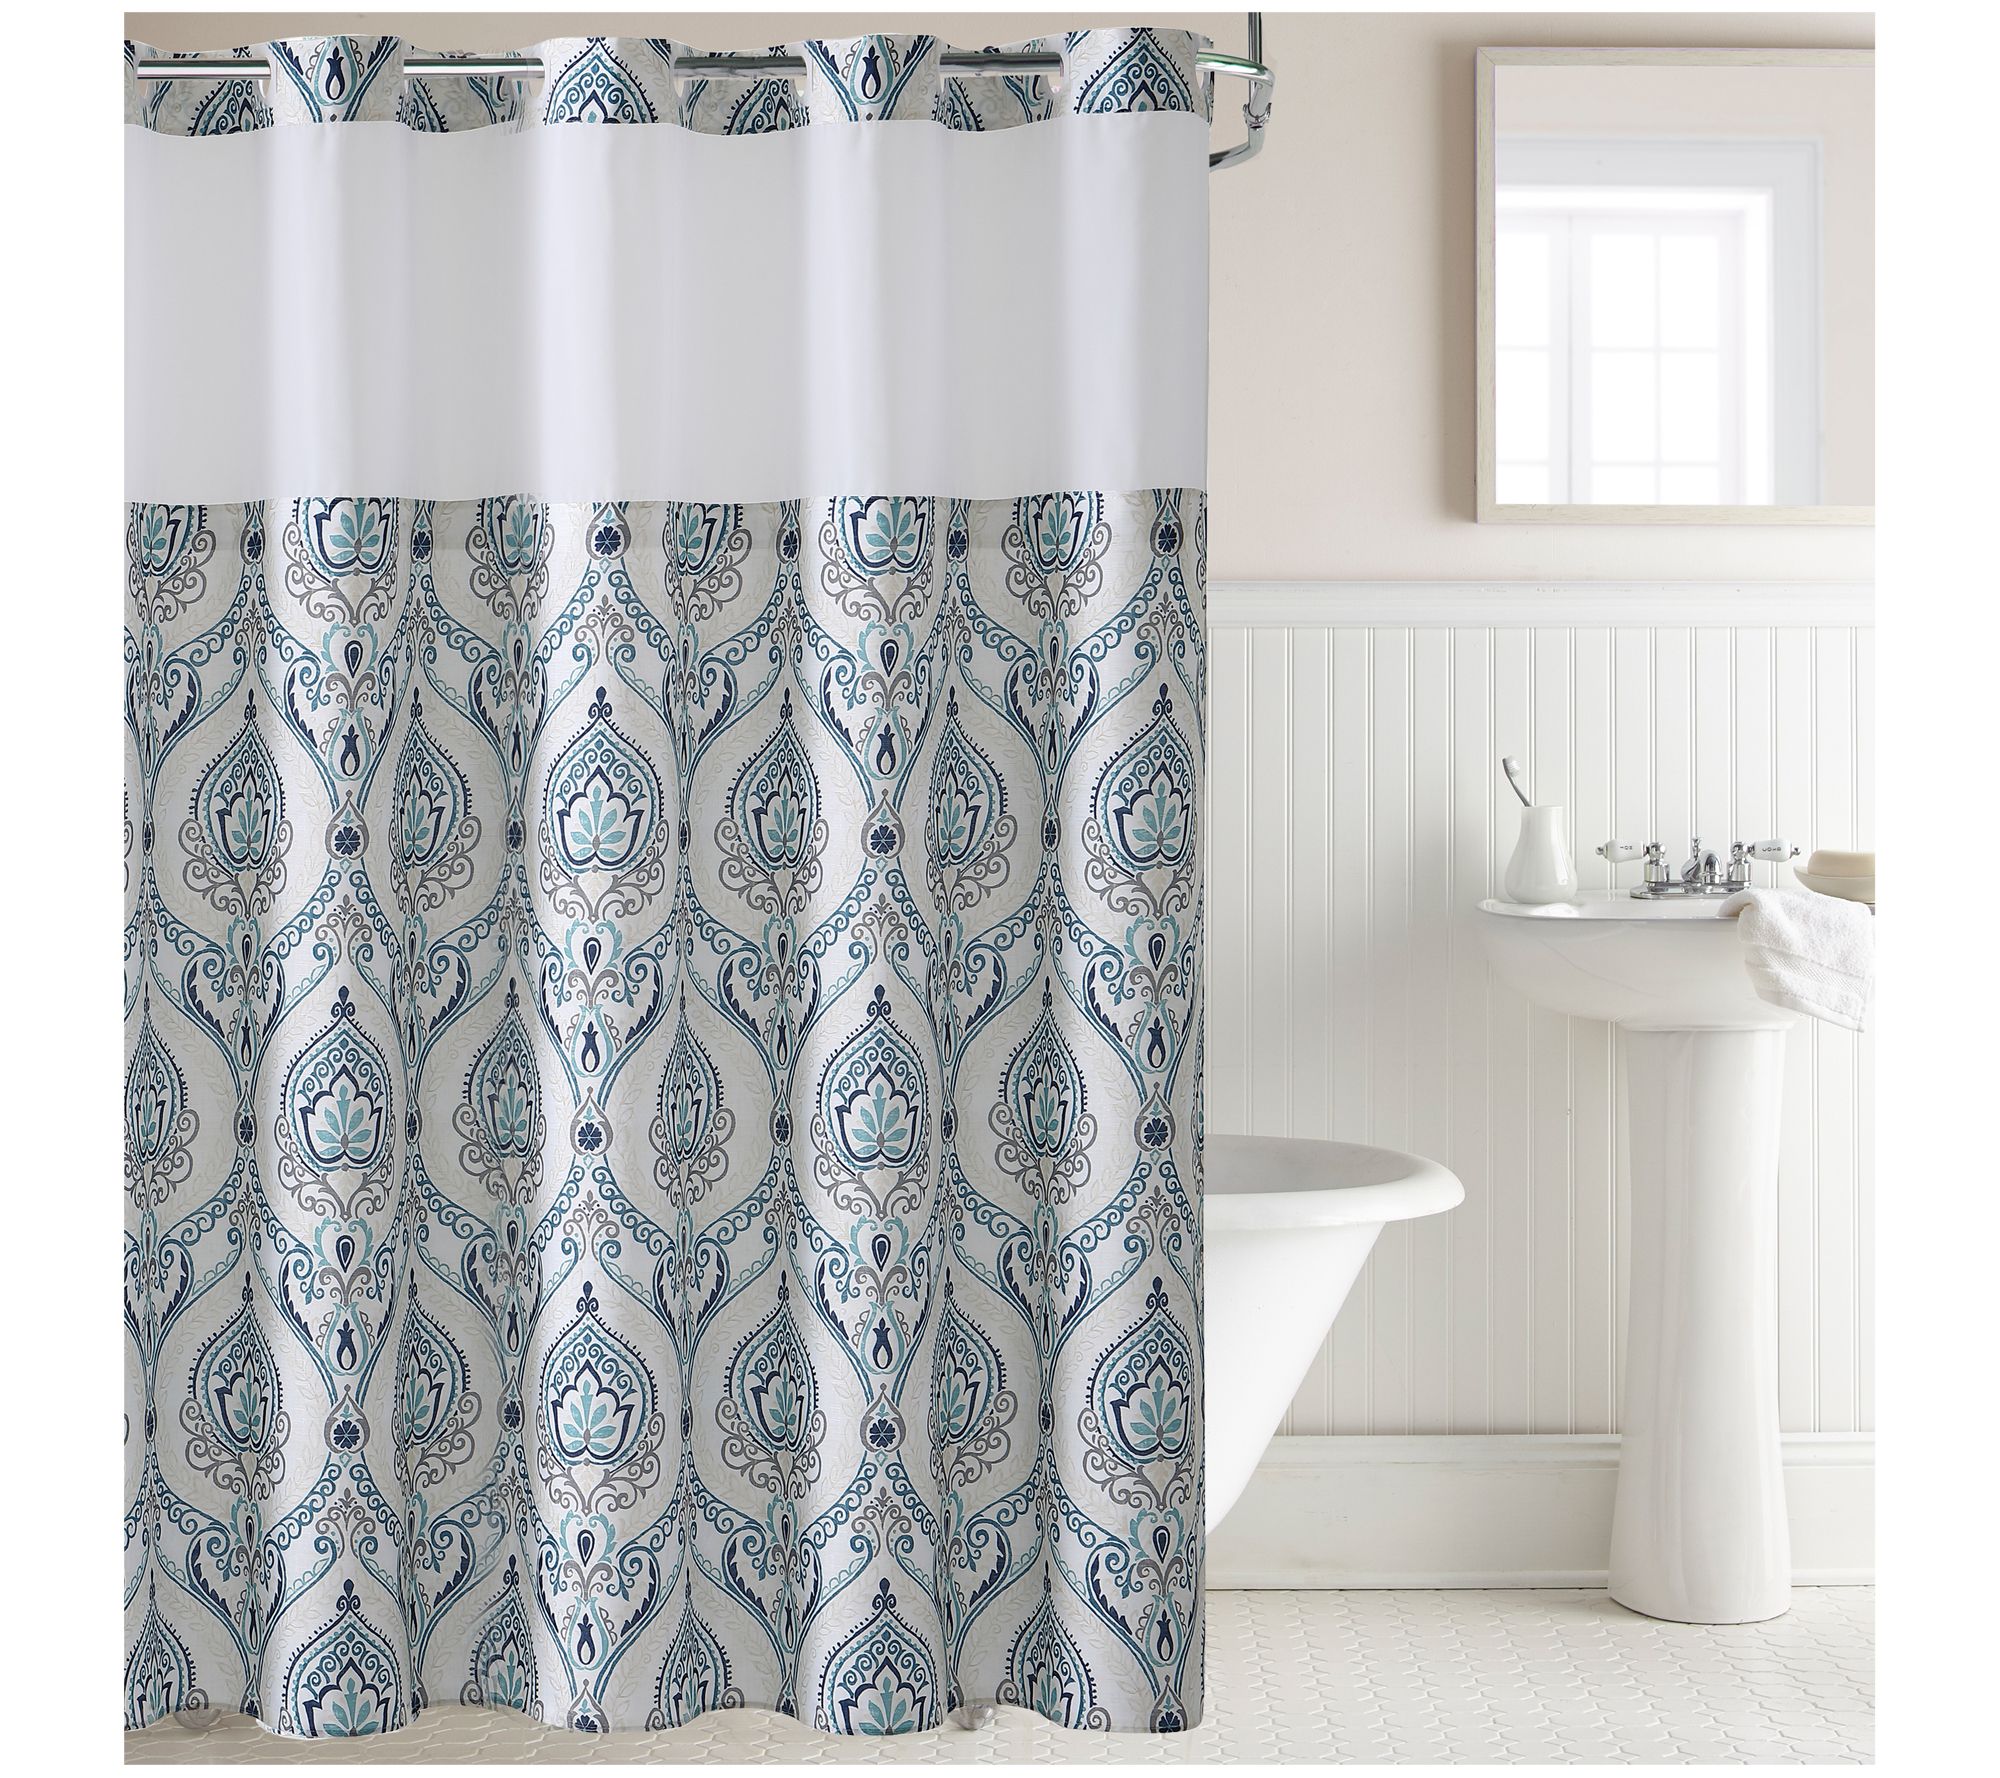 Hookless French Damask Print Shower Curtain with Peva Liner - QVC.com